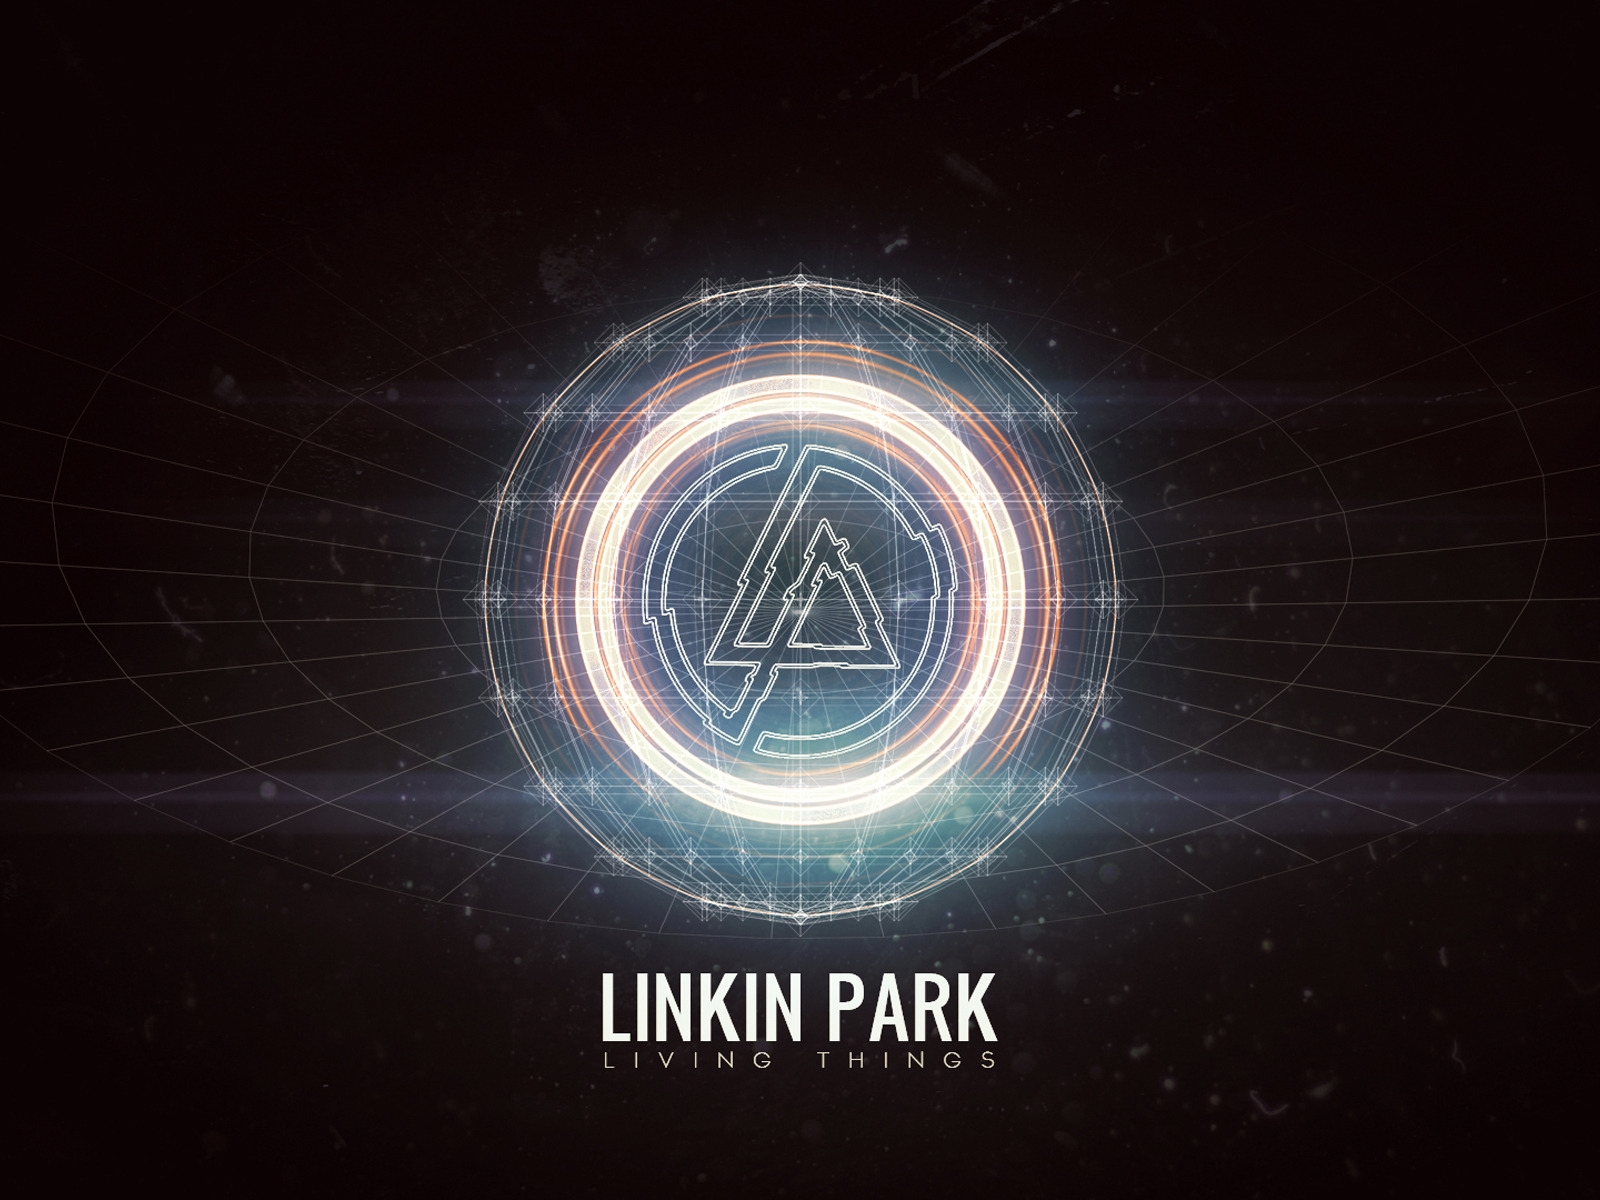 Linkin Park Living Things for 1600 x 1200 resolution